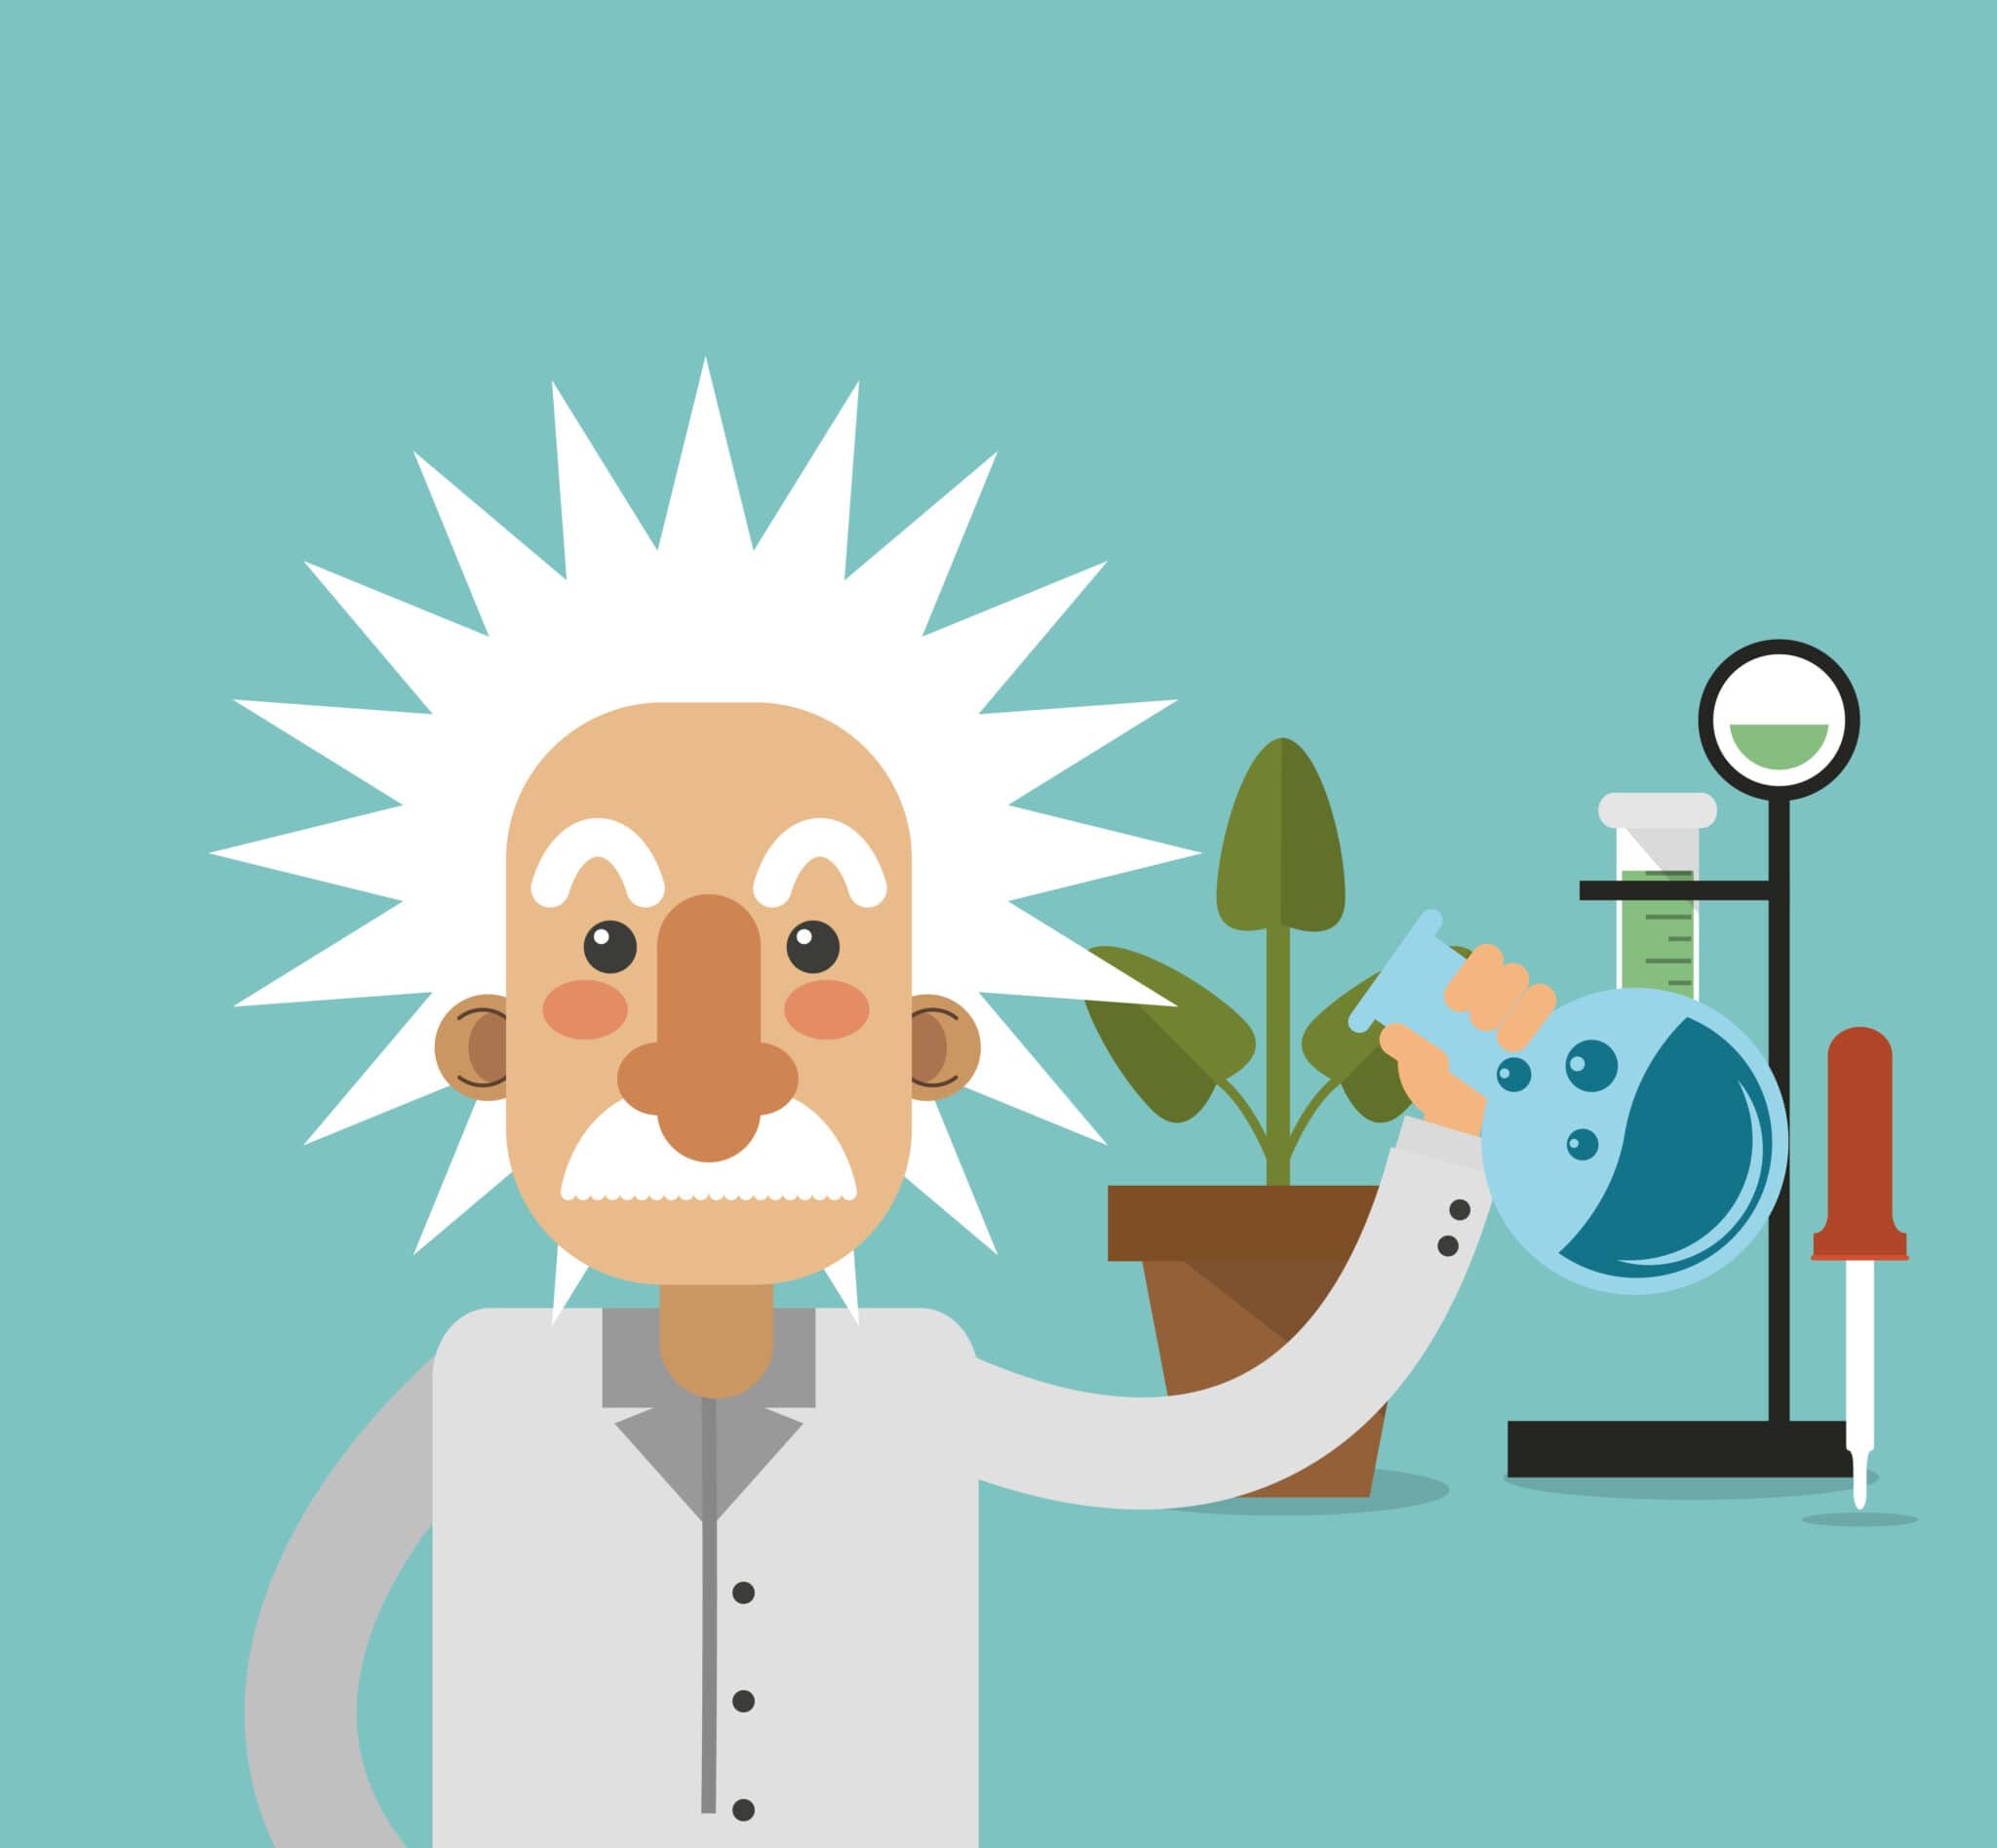 flat design albert einstein with science related icons image